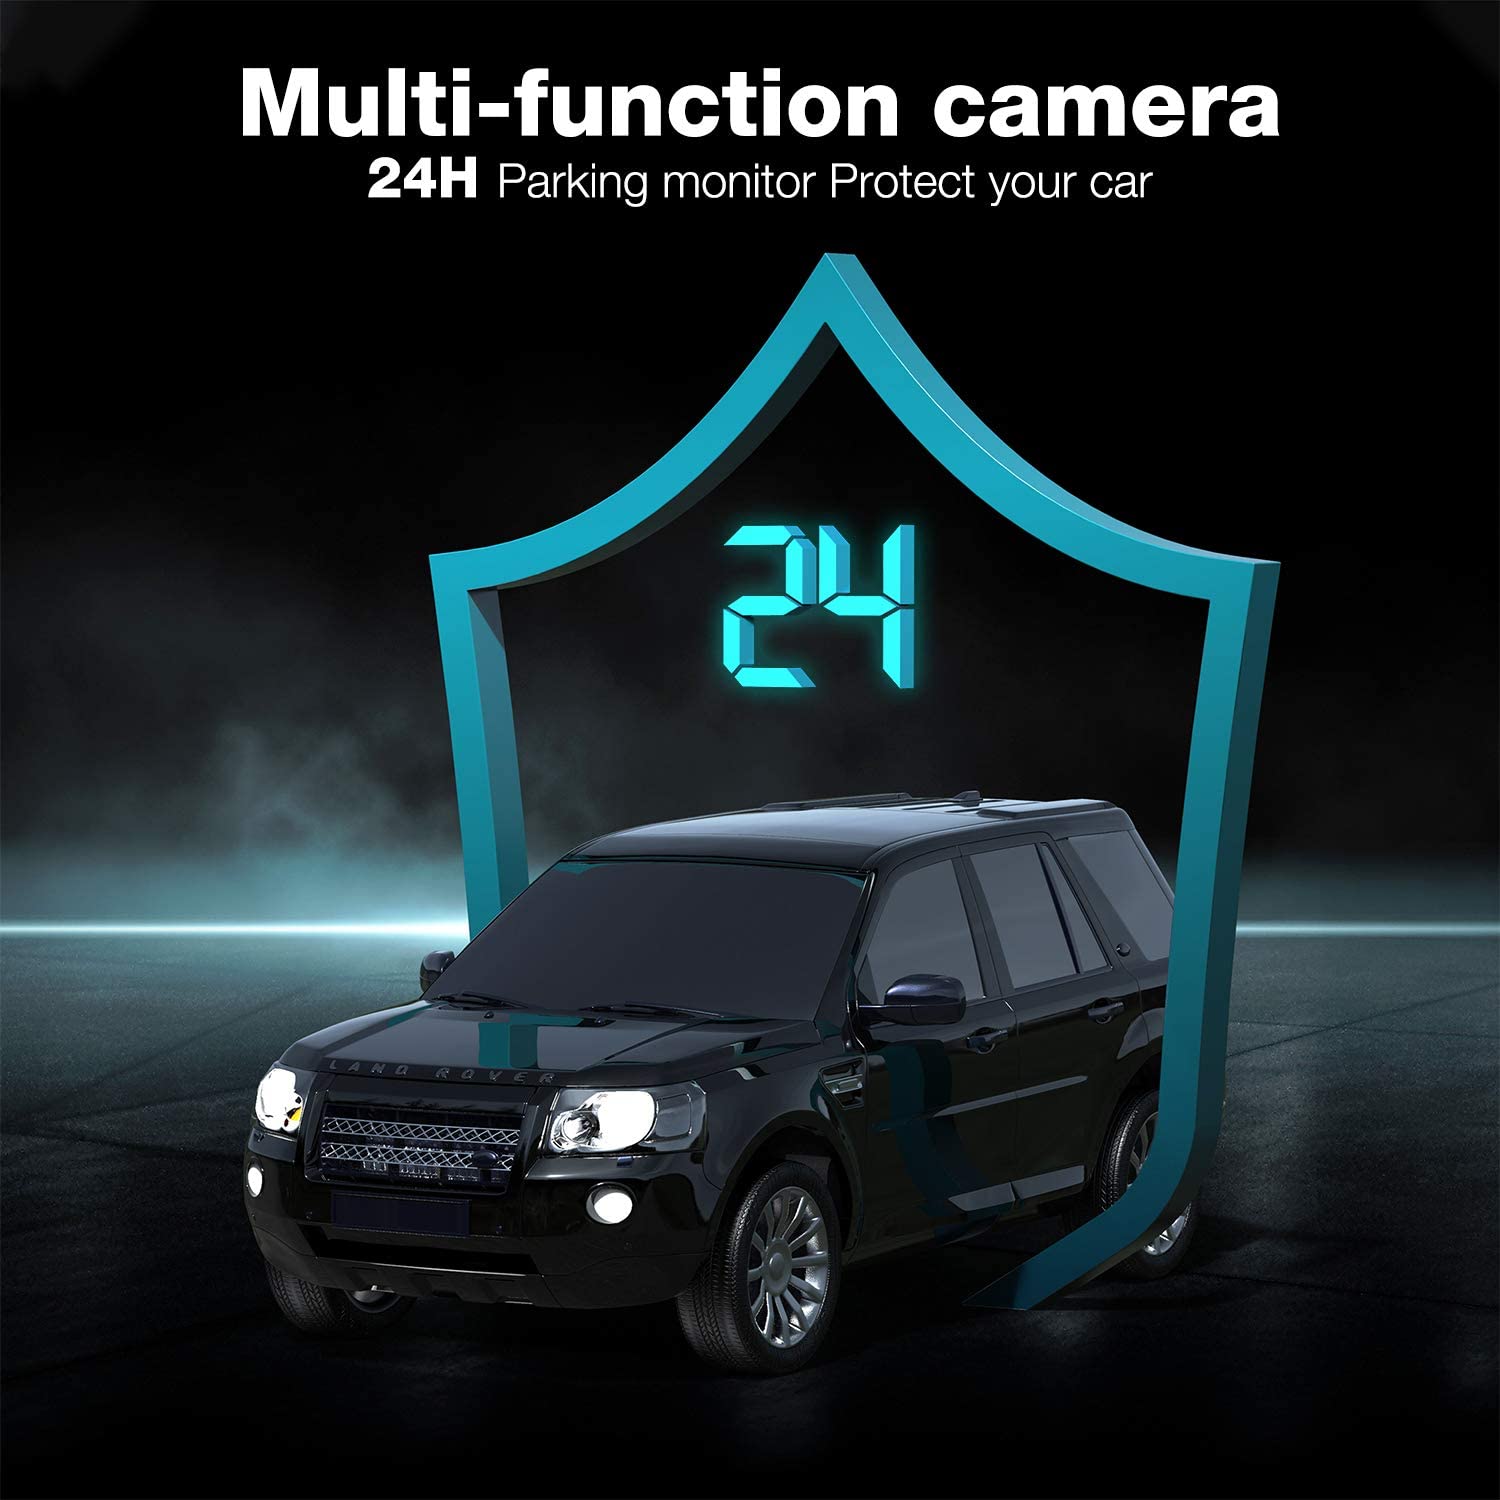 Campark DC35 Dash Camera supports 24H parking monitor